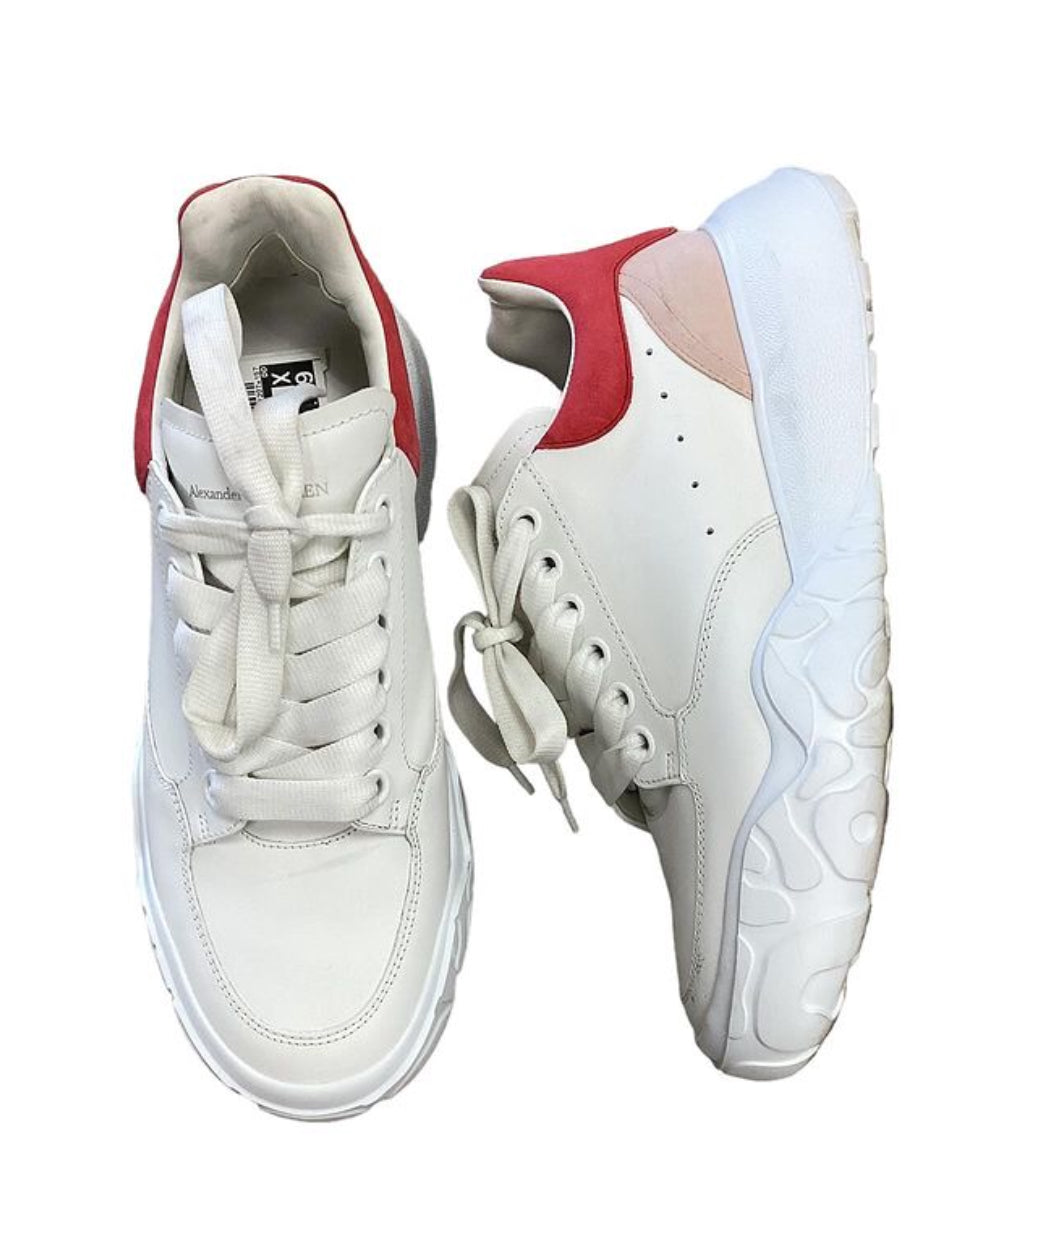 Shoes Sneakers By Alexander Mcqueen  Size: 9.5